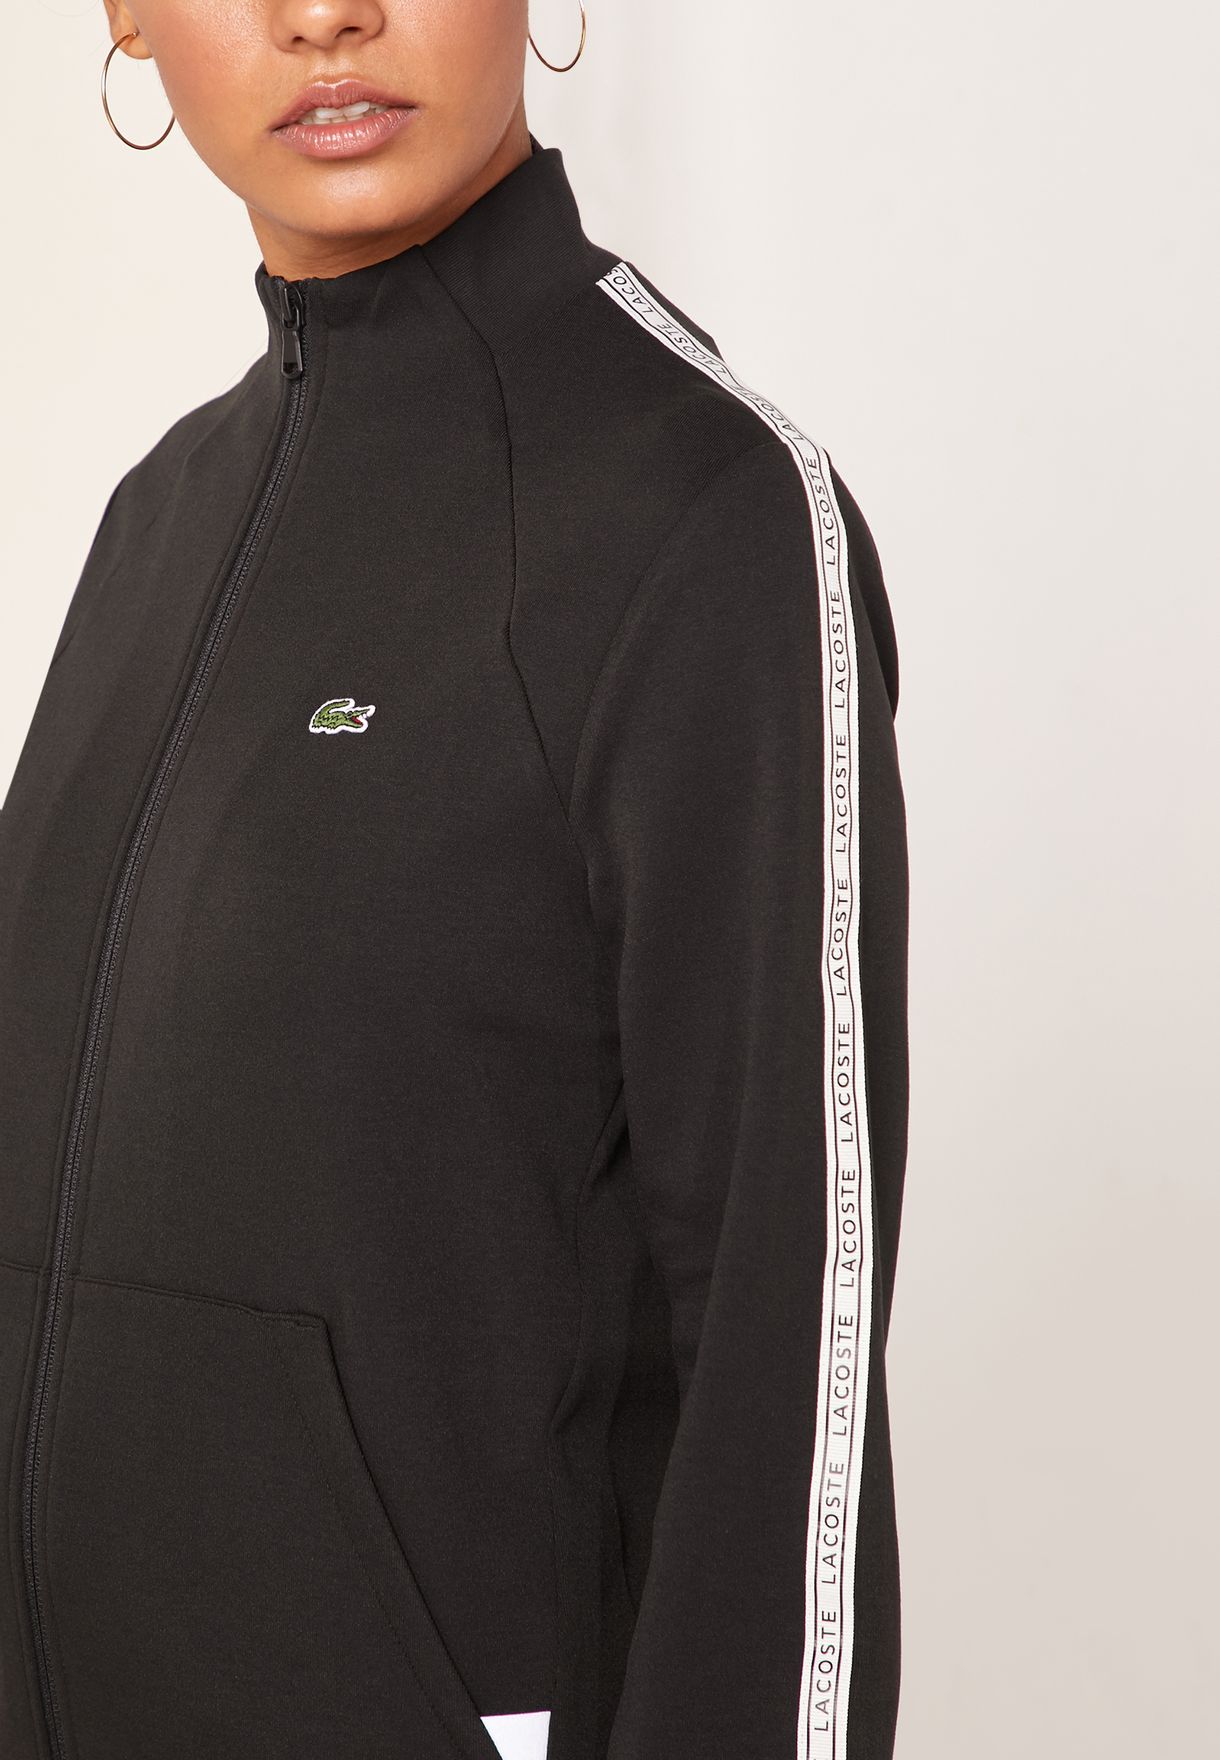 lacoste taped track jacket off 77 